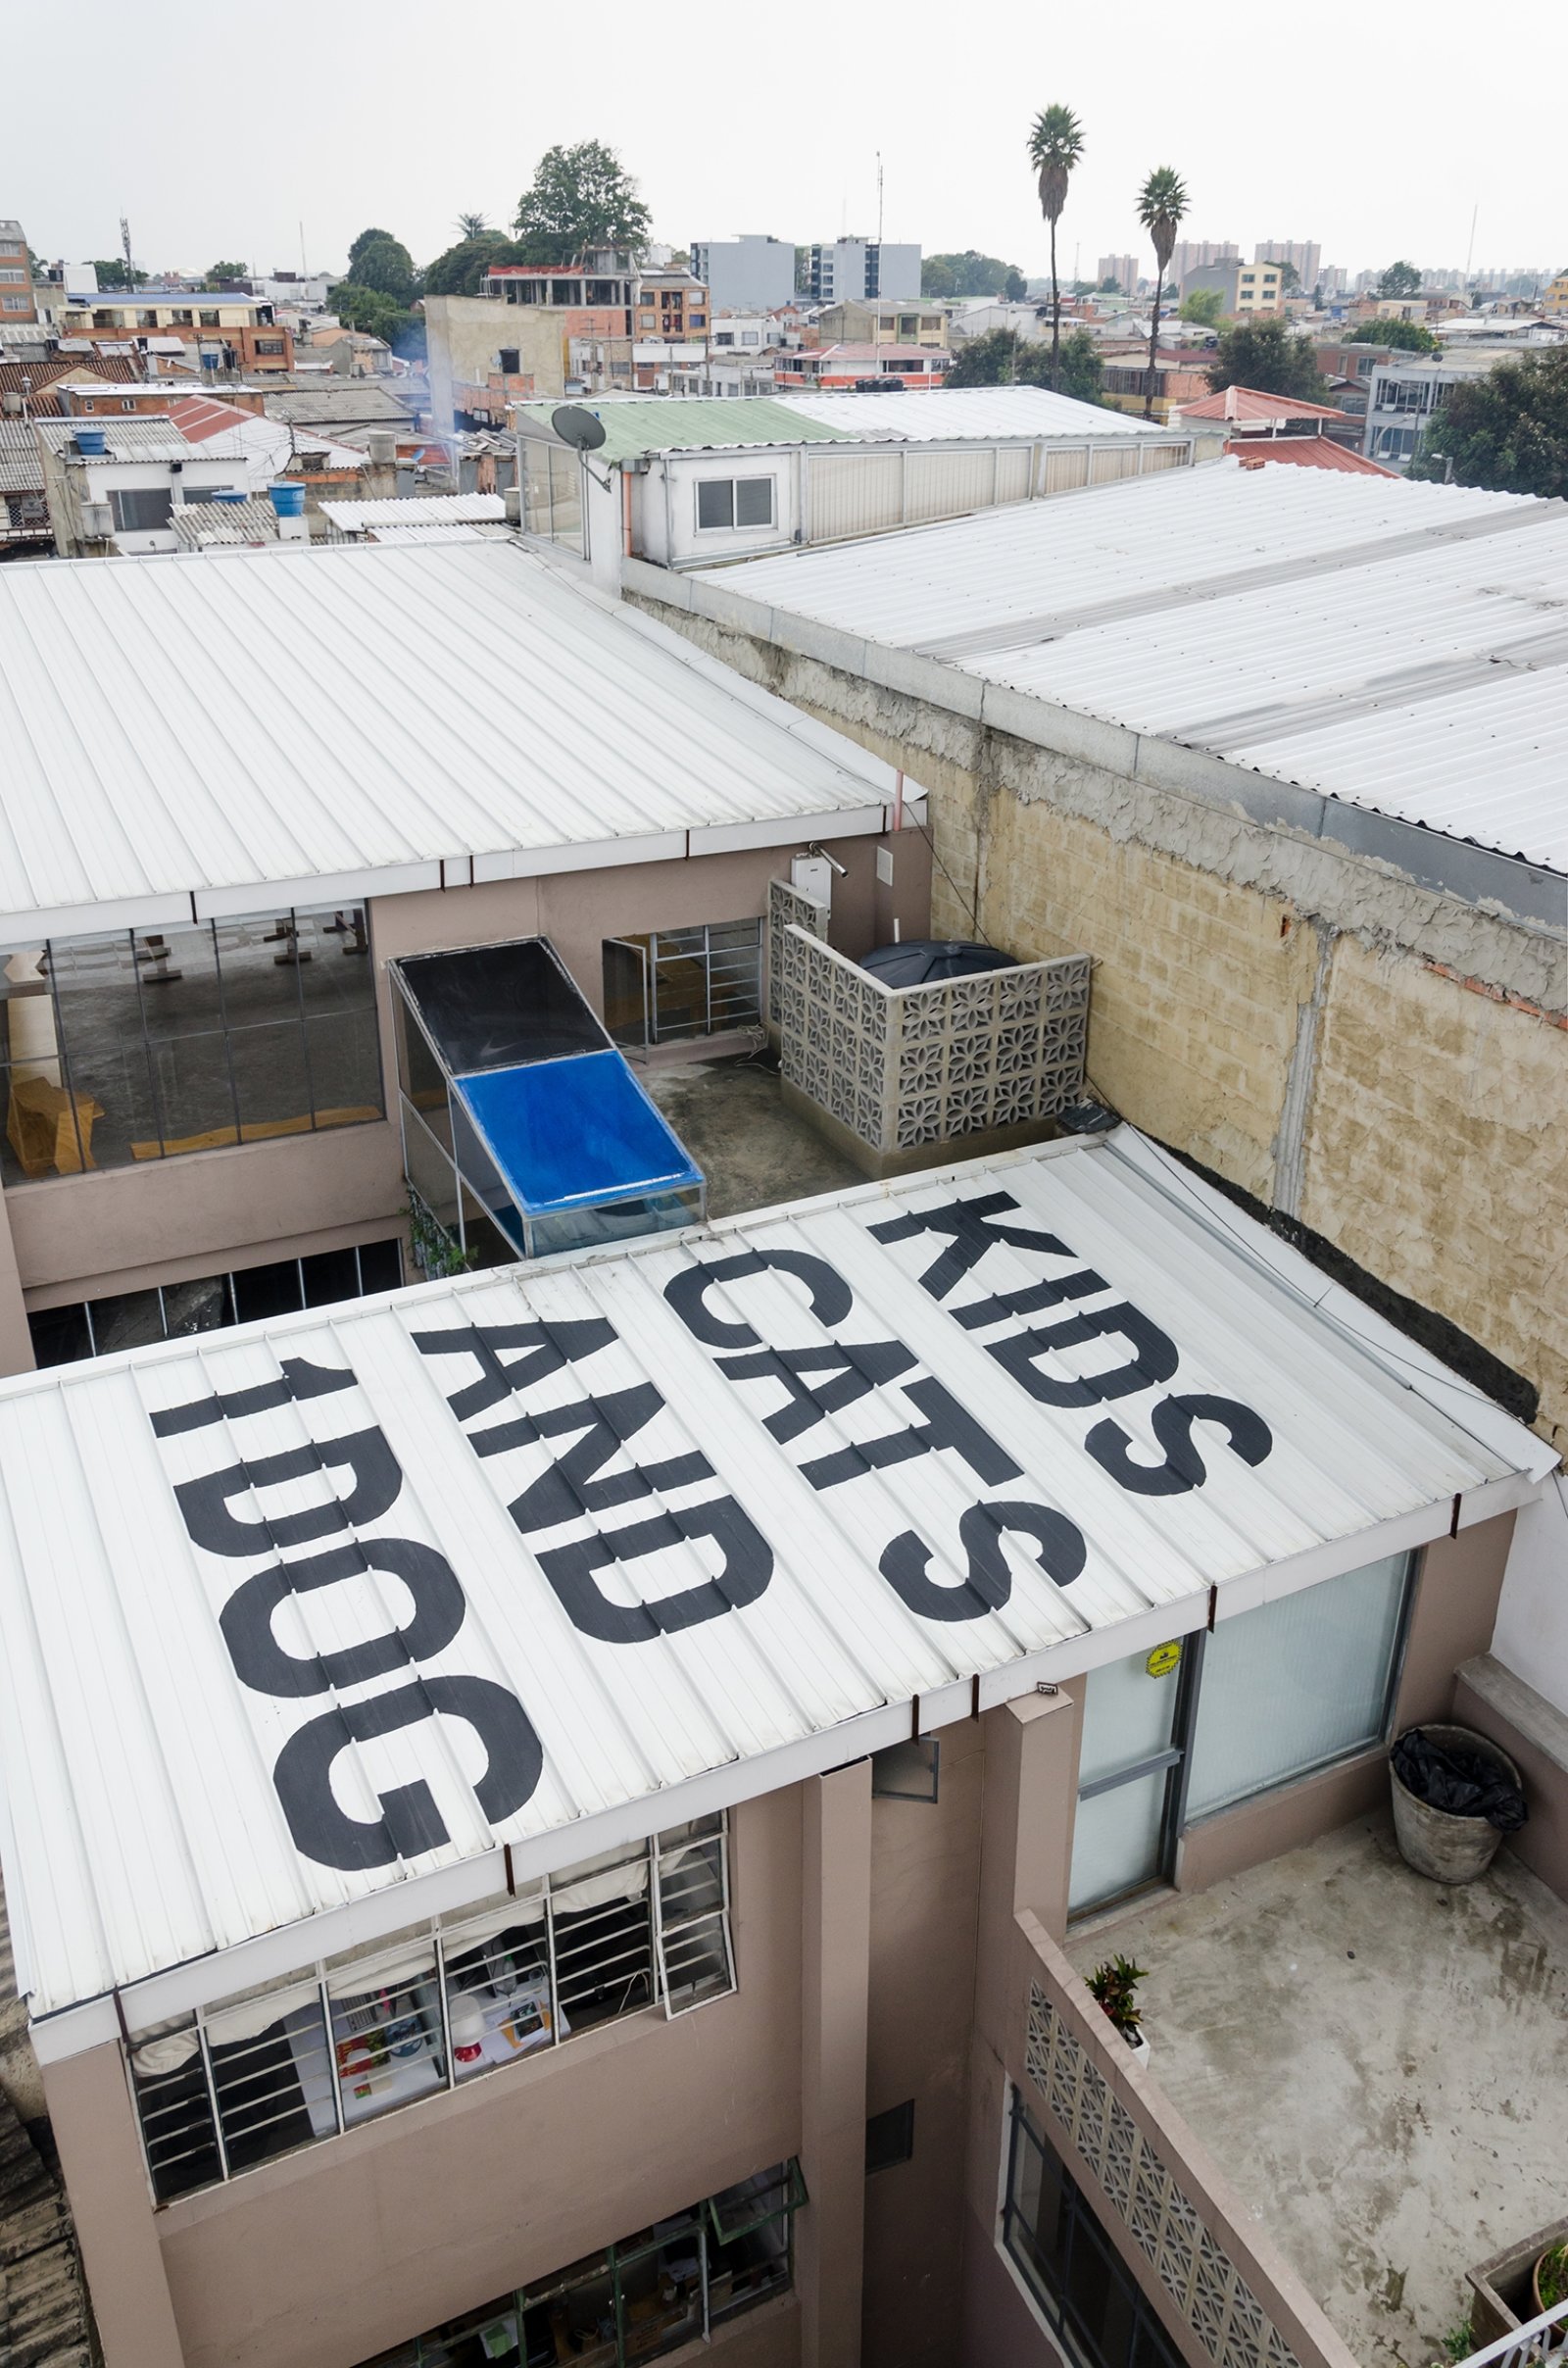 Abbas Akhavan, Kids, Cats and 1 Dog, 2016, paint on rooftop, dimensions variable. Installation view, FLORA ars+natura, Bogotá, Colombia, 2016